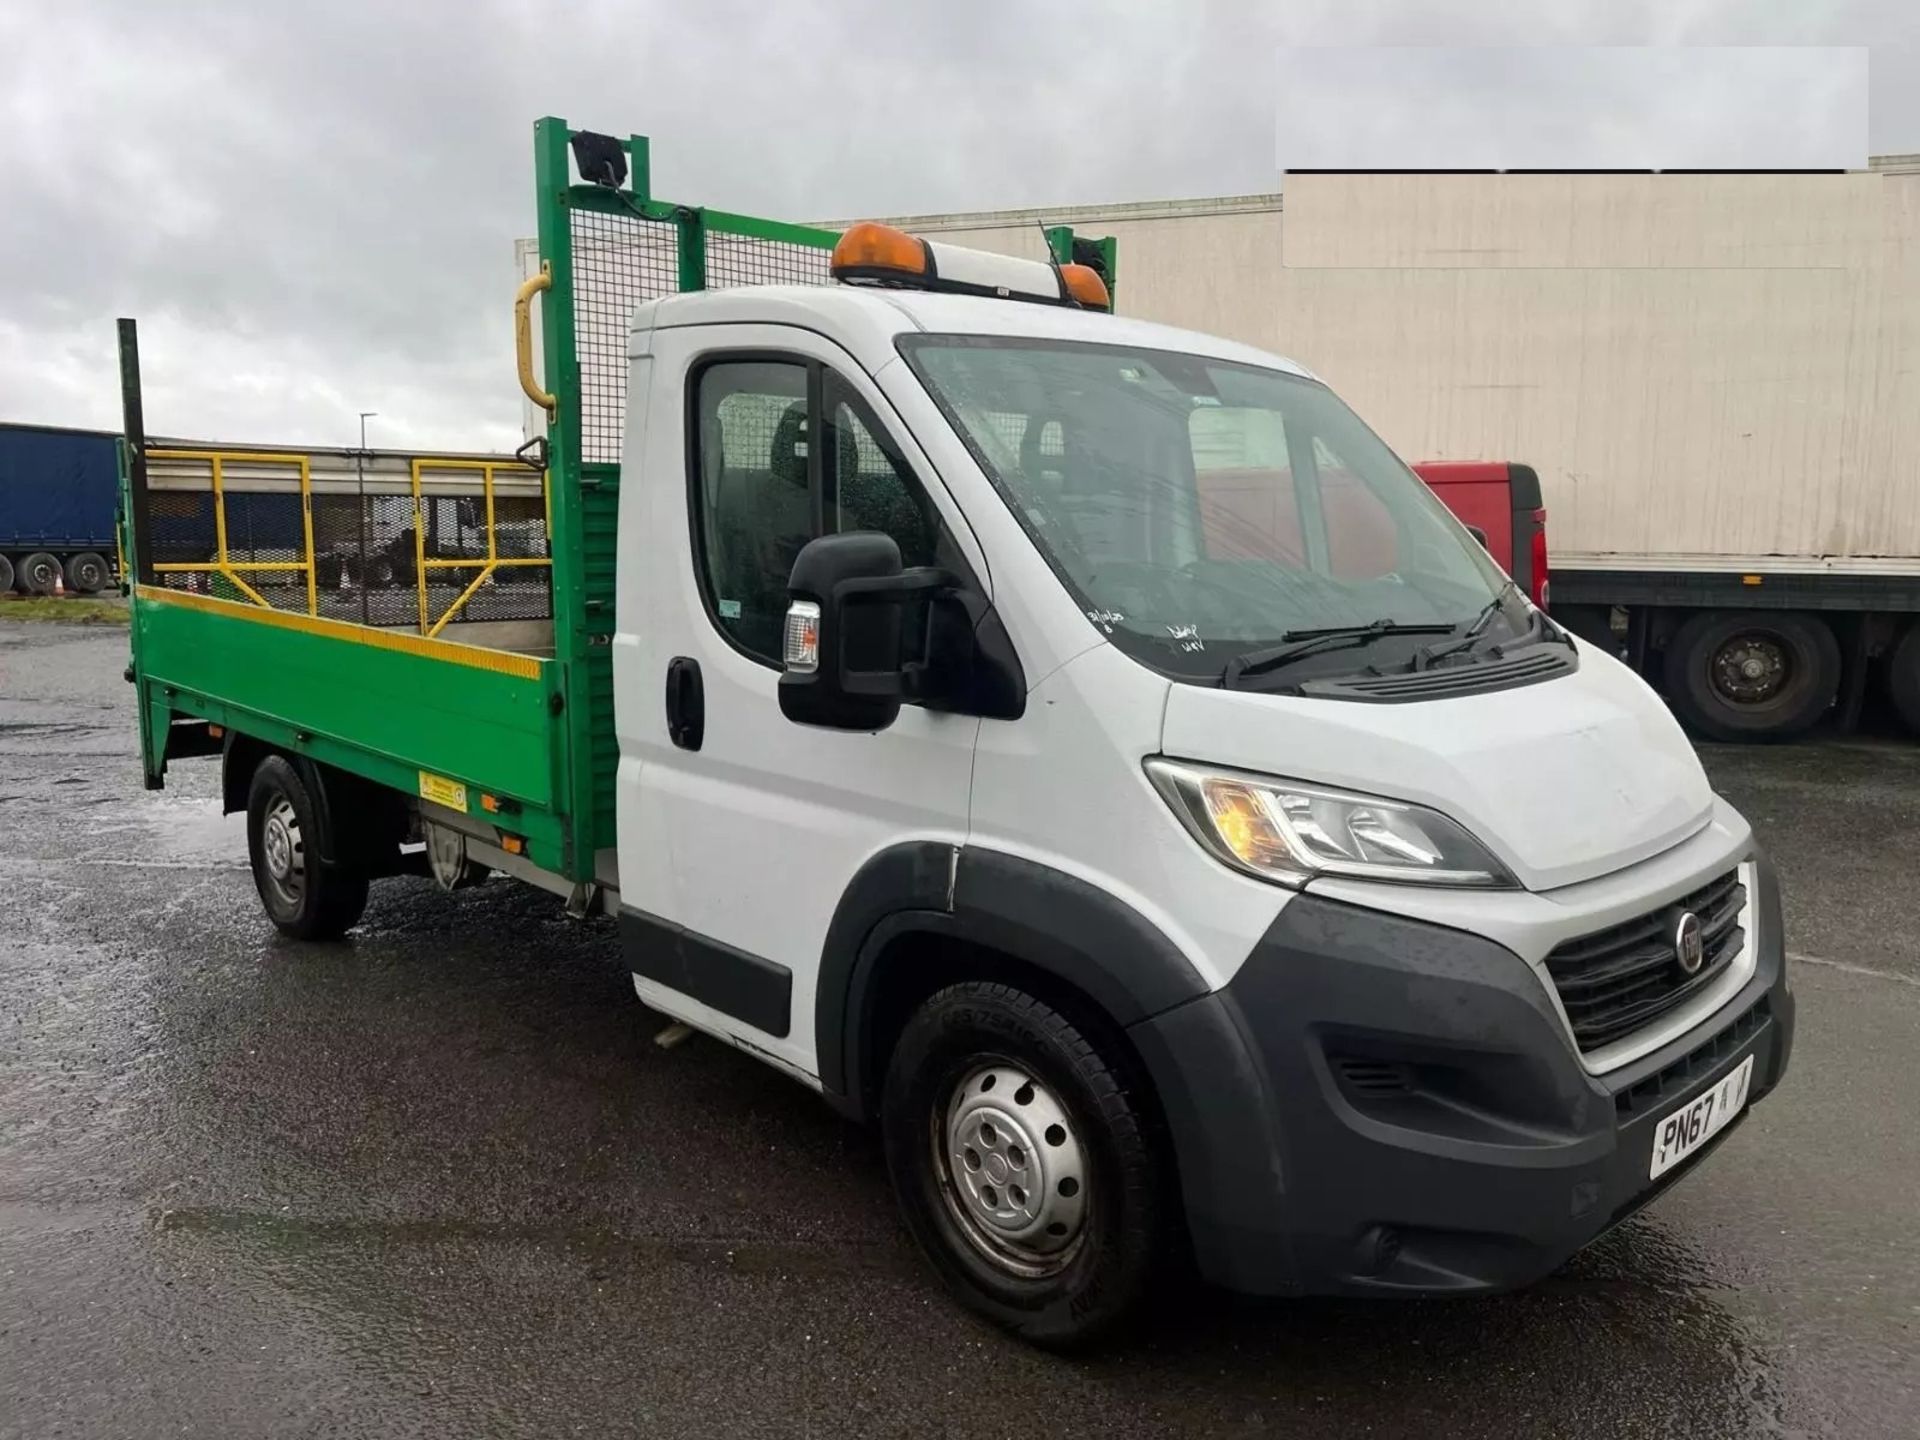 FIAT DUCATO DROPSIDE TRUCK 2017 - PERFECT FOR HEAVY DUTY TASKS - Image 5 of 6